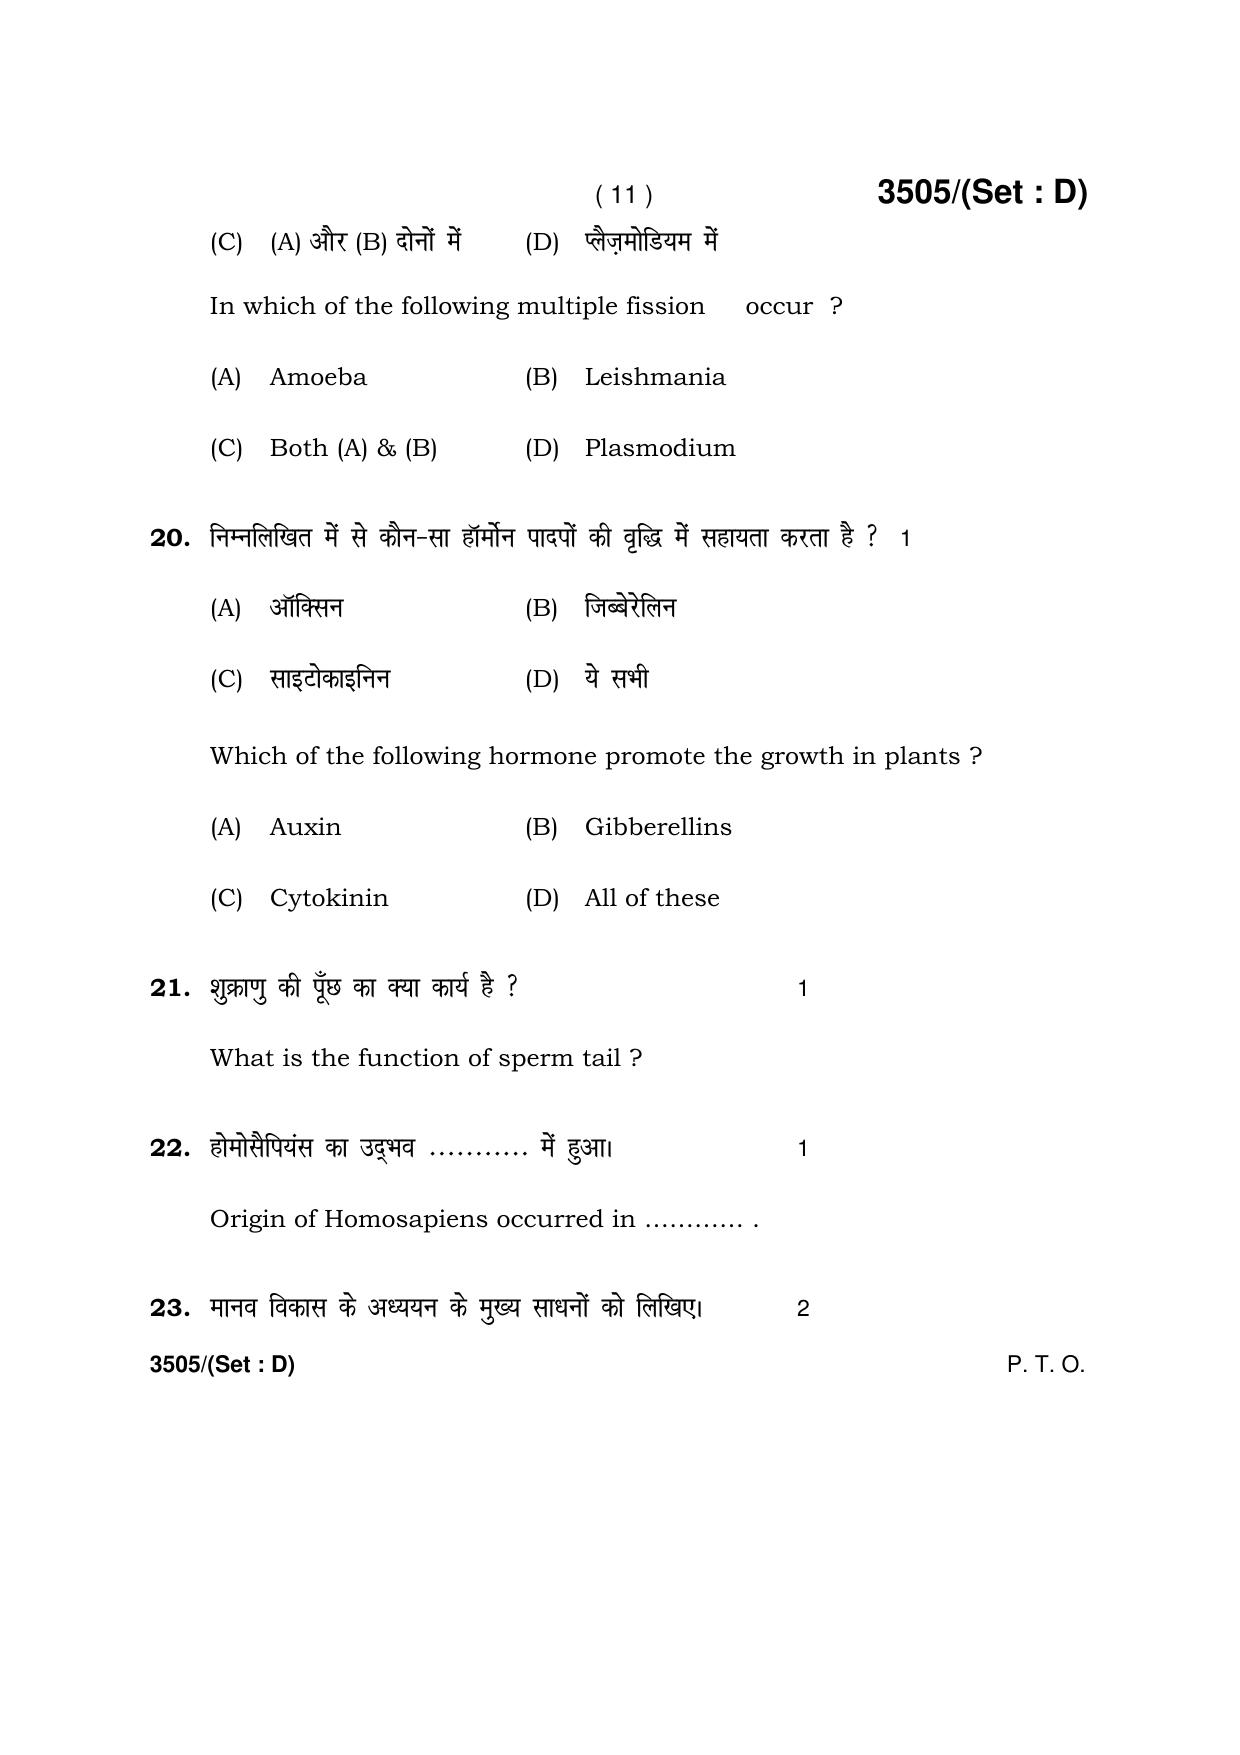 Haryana Board HBSE Class 10 Science -D 2018 Question Paper - Page 11